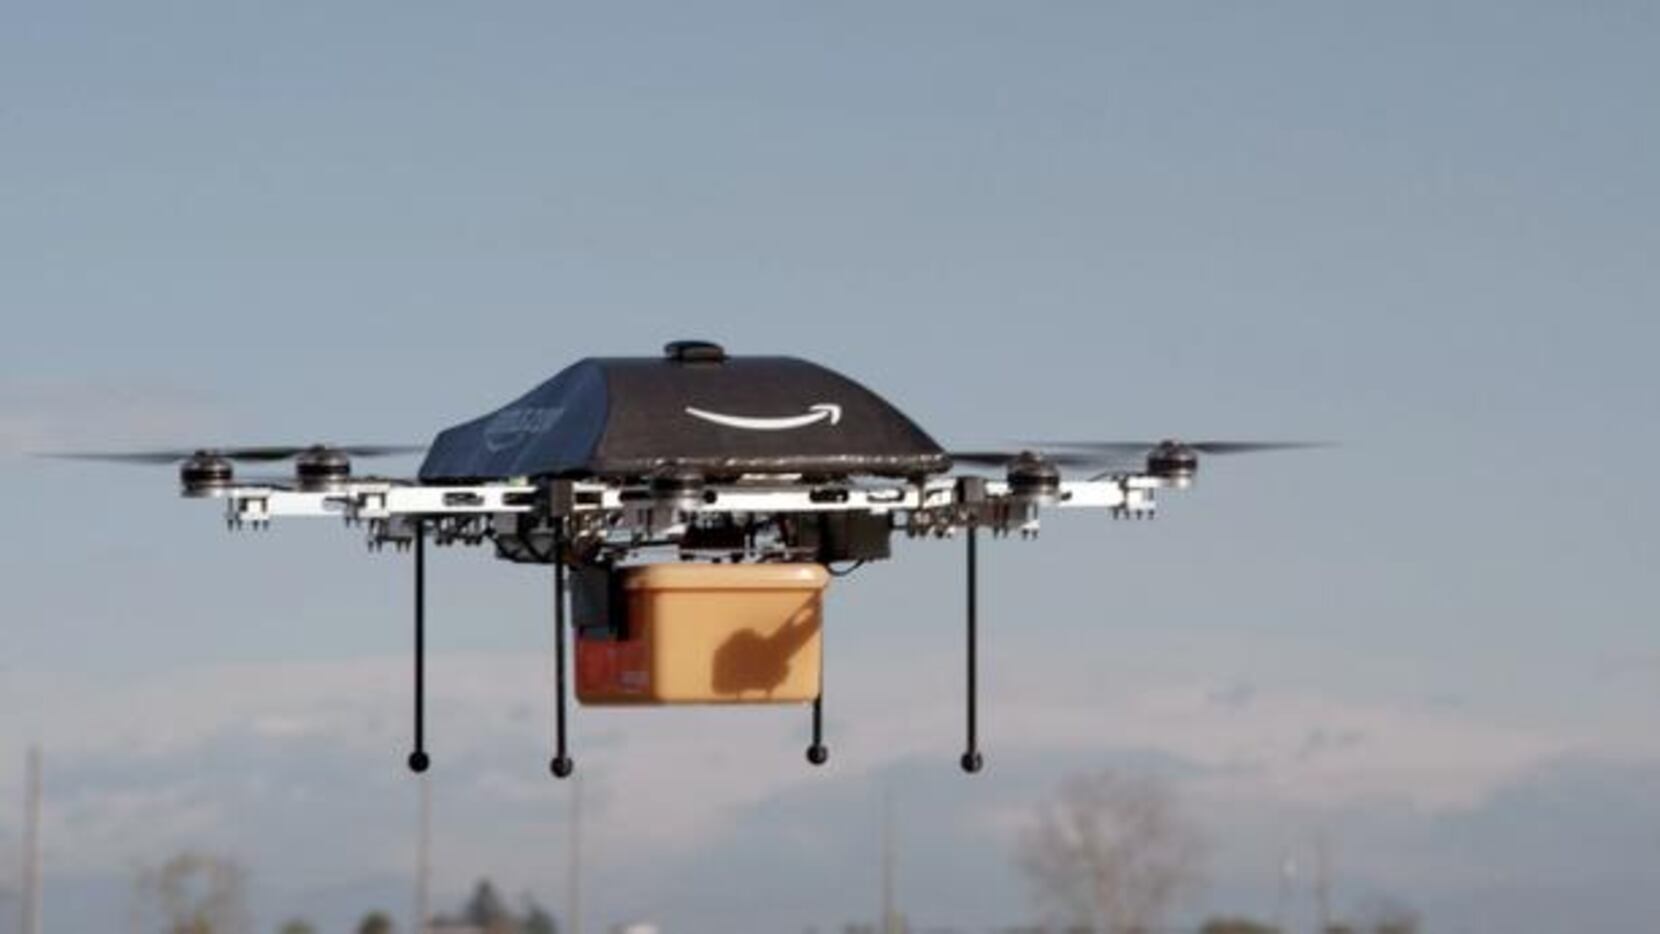 
Amazon said it is developing aerial vehicles as part of Amazon Prime Air.
